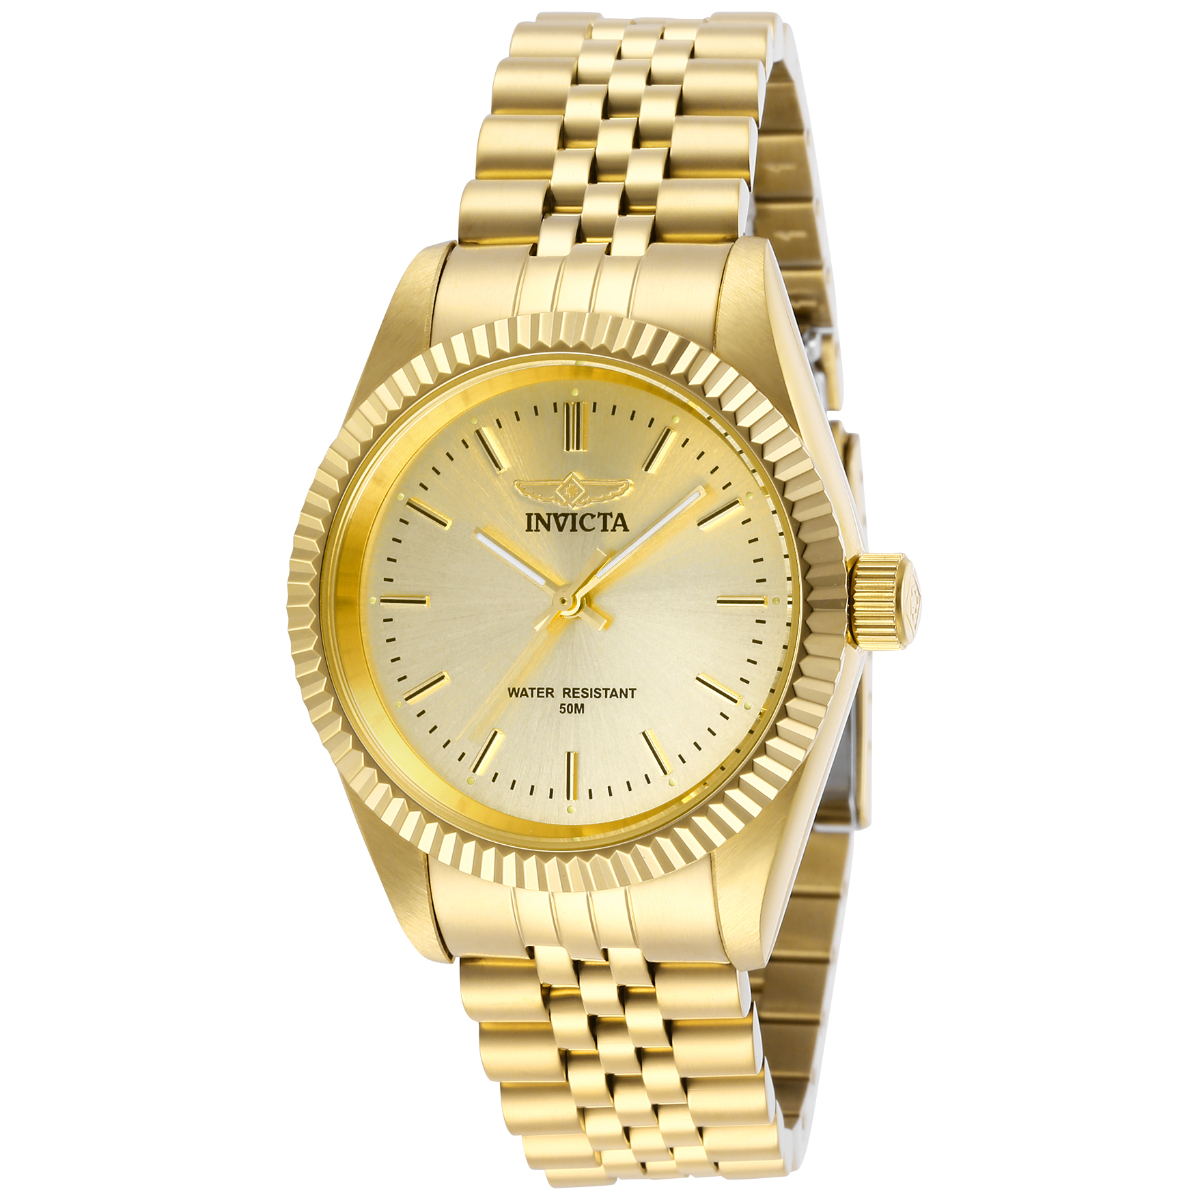 Invicta Specialty Women's Watch - 36mm, Gold (29411)